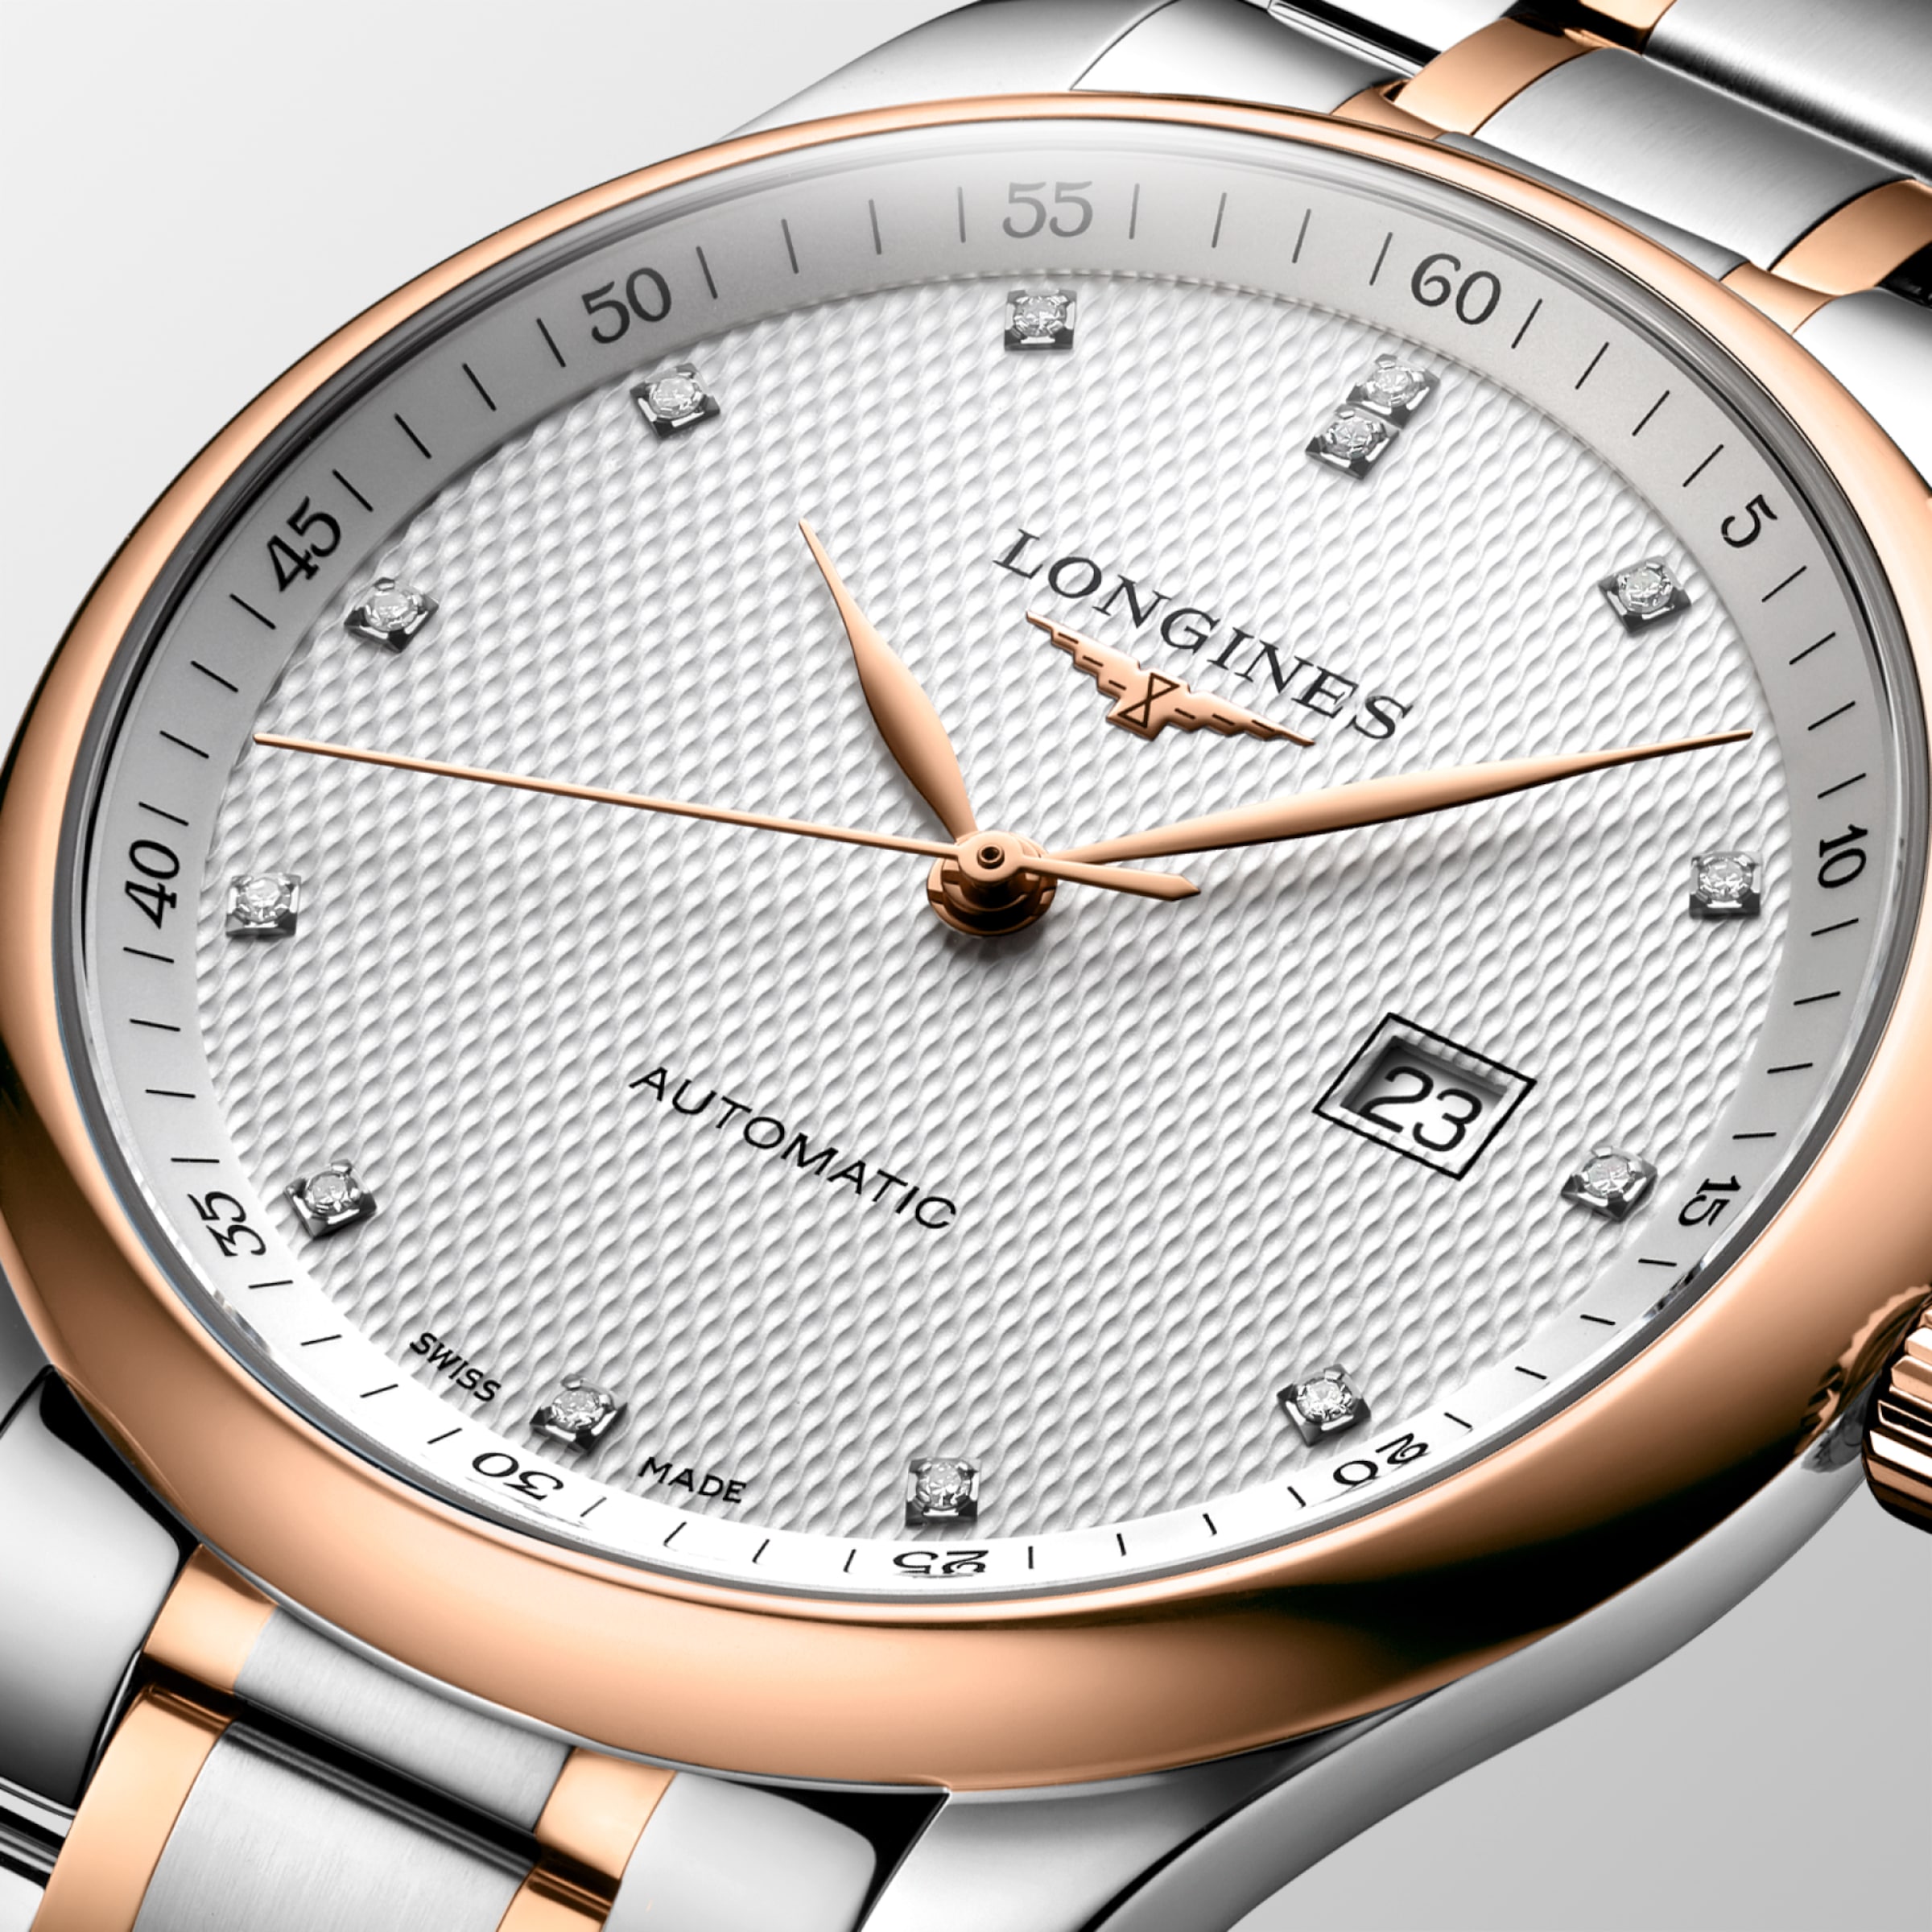 Longines MASTER COLLECTION Automatic Stainless steel and 18 karat pink gold cap 200 Watch - L2.893.5.77.7